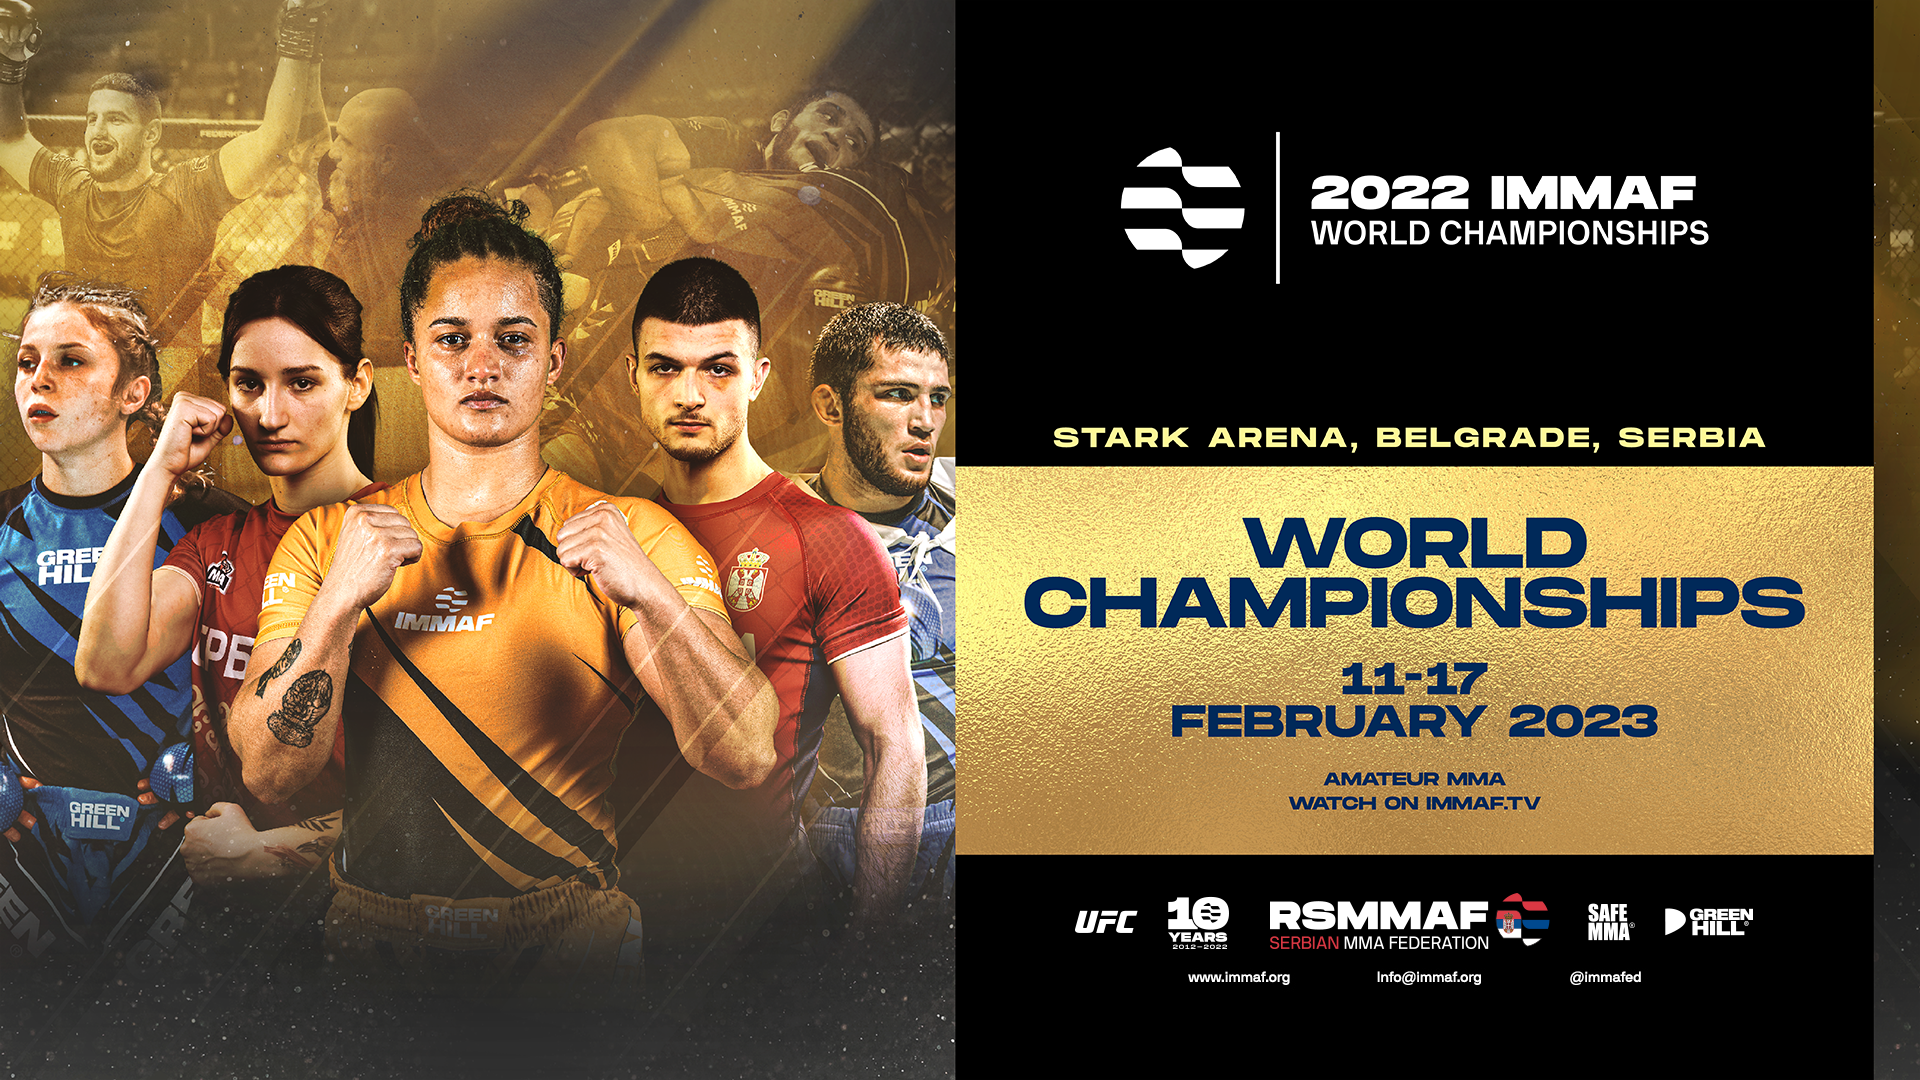 2022 IMMAF World Championships and BRAVE CF 69 at Stark Arena